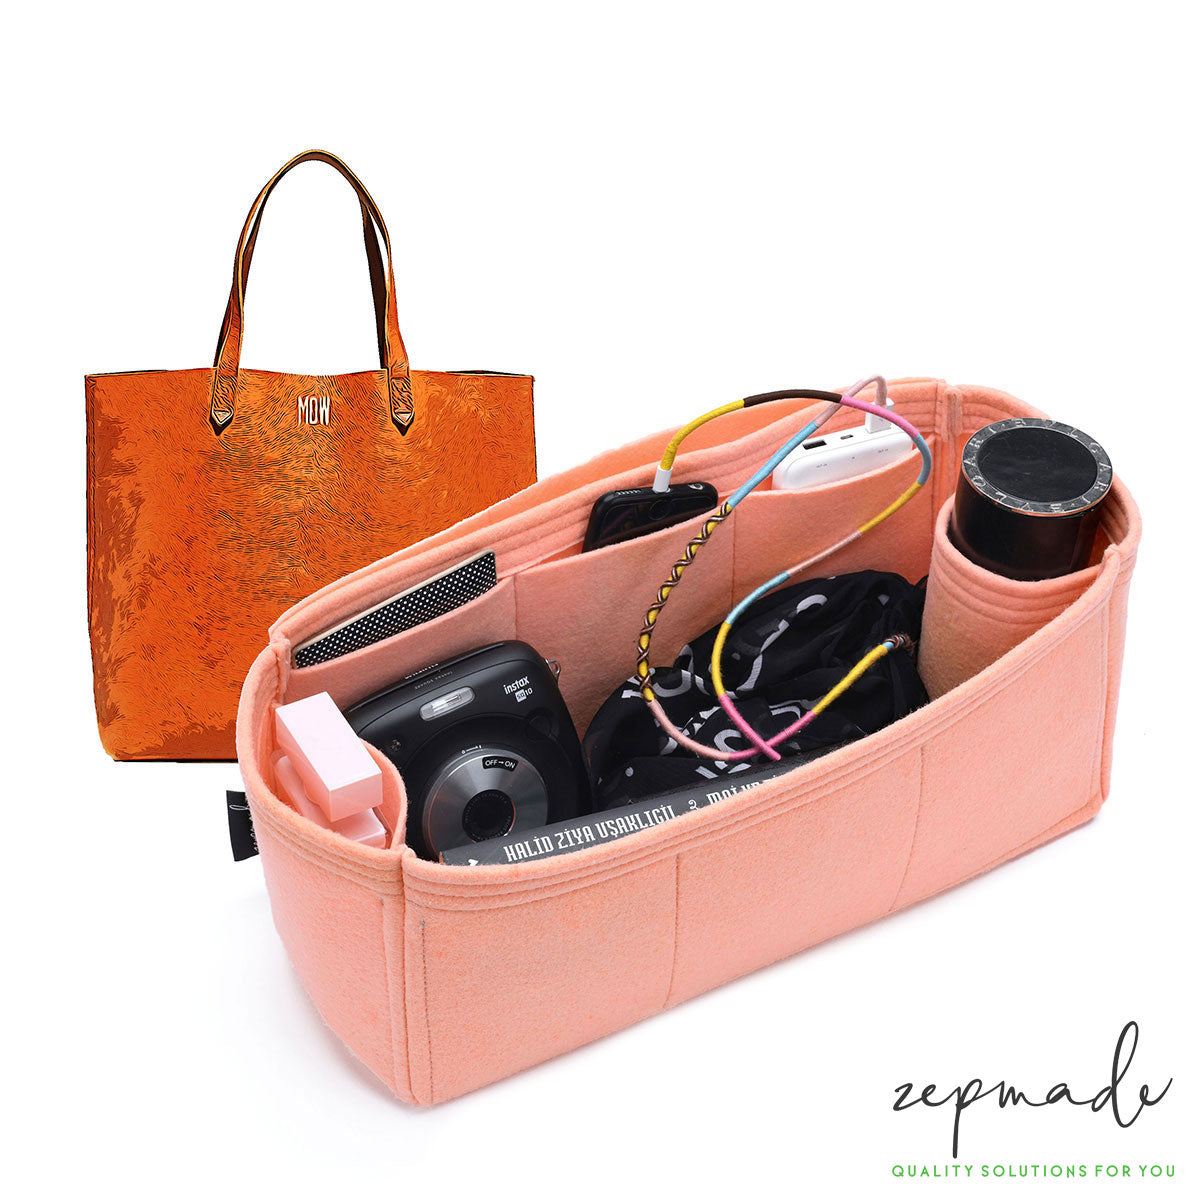 Madewell Transport Large Tote Organizer Insert, Bag Organizer with Laptop  Compartment and Single Bottle Holder